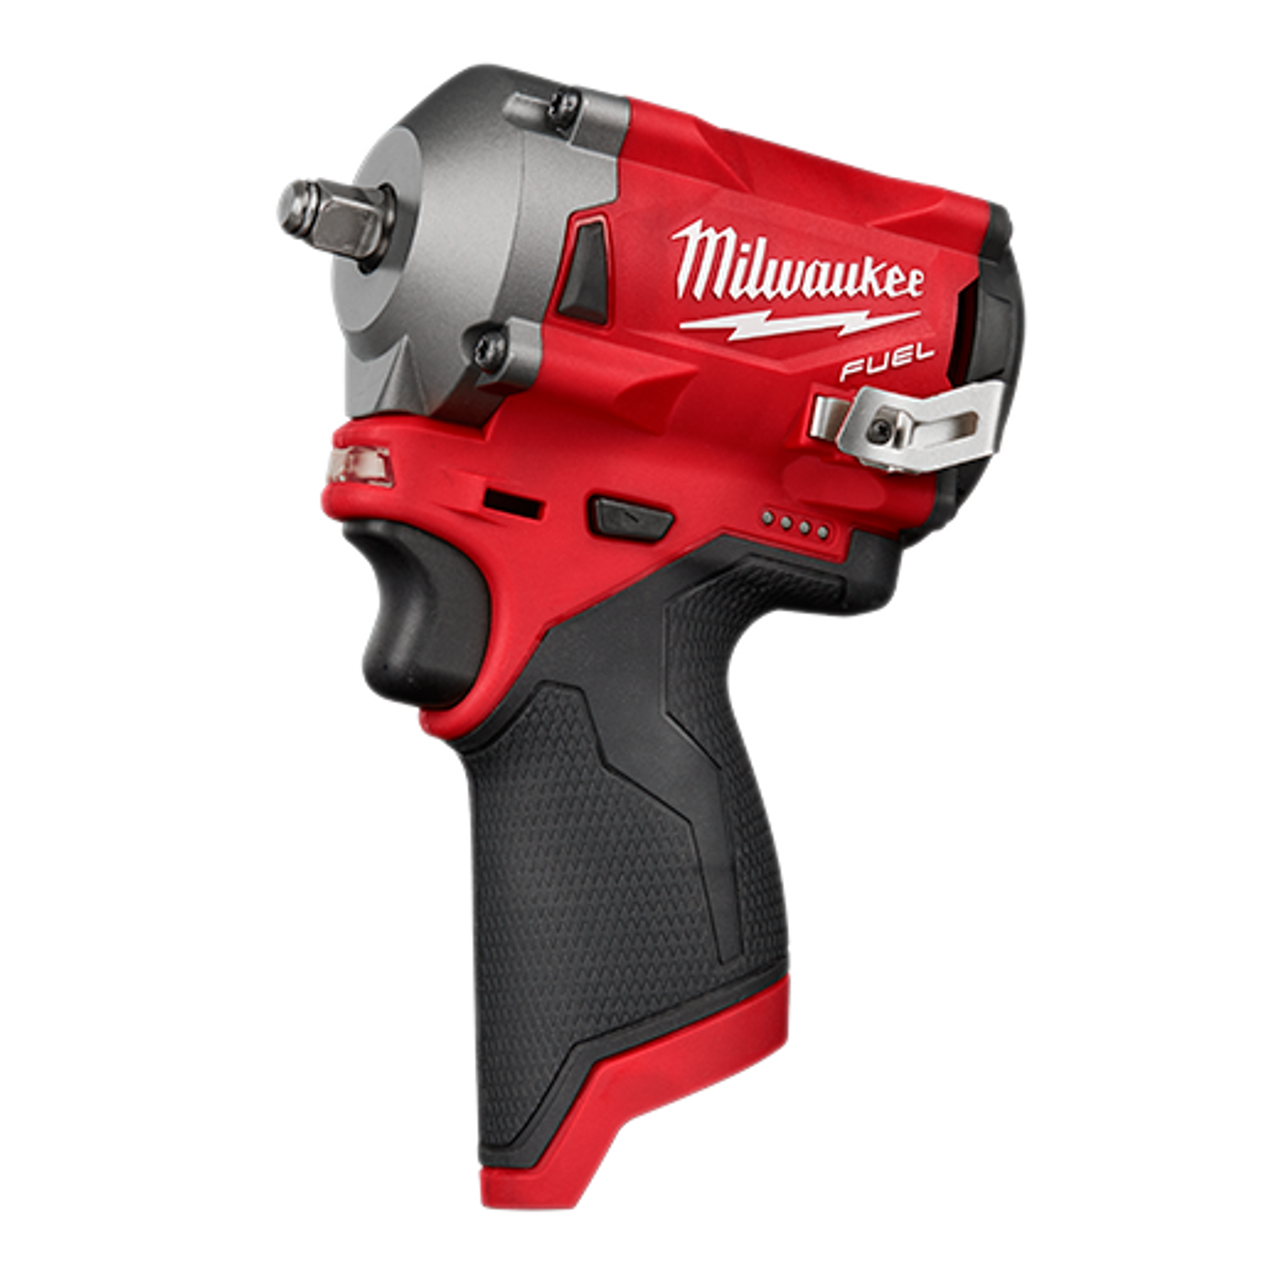 M12 FUEL 3/8" Stubby Impact Wrench